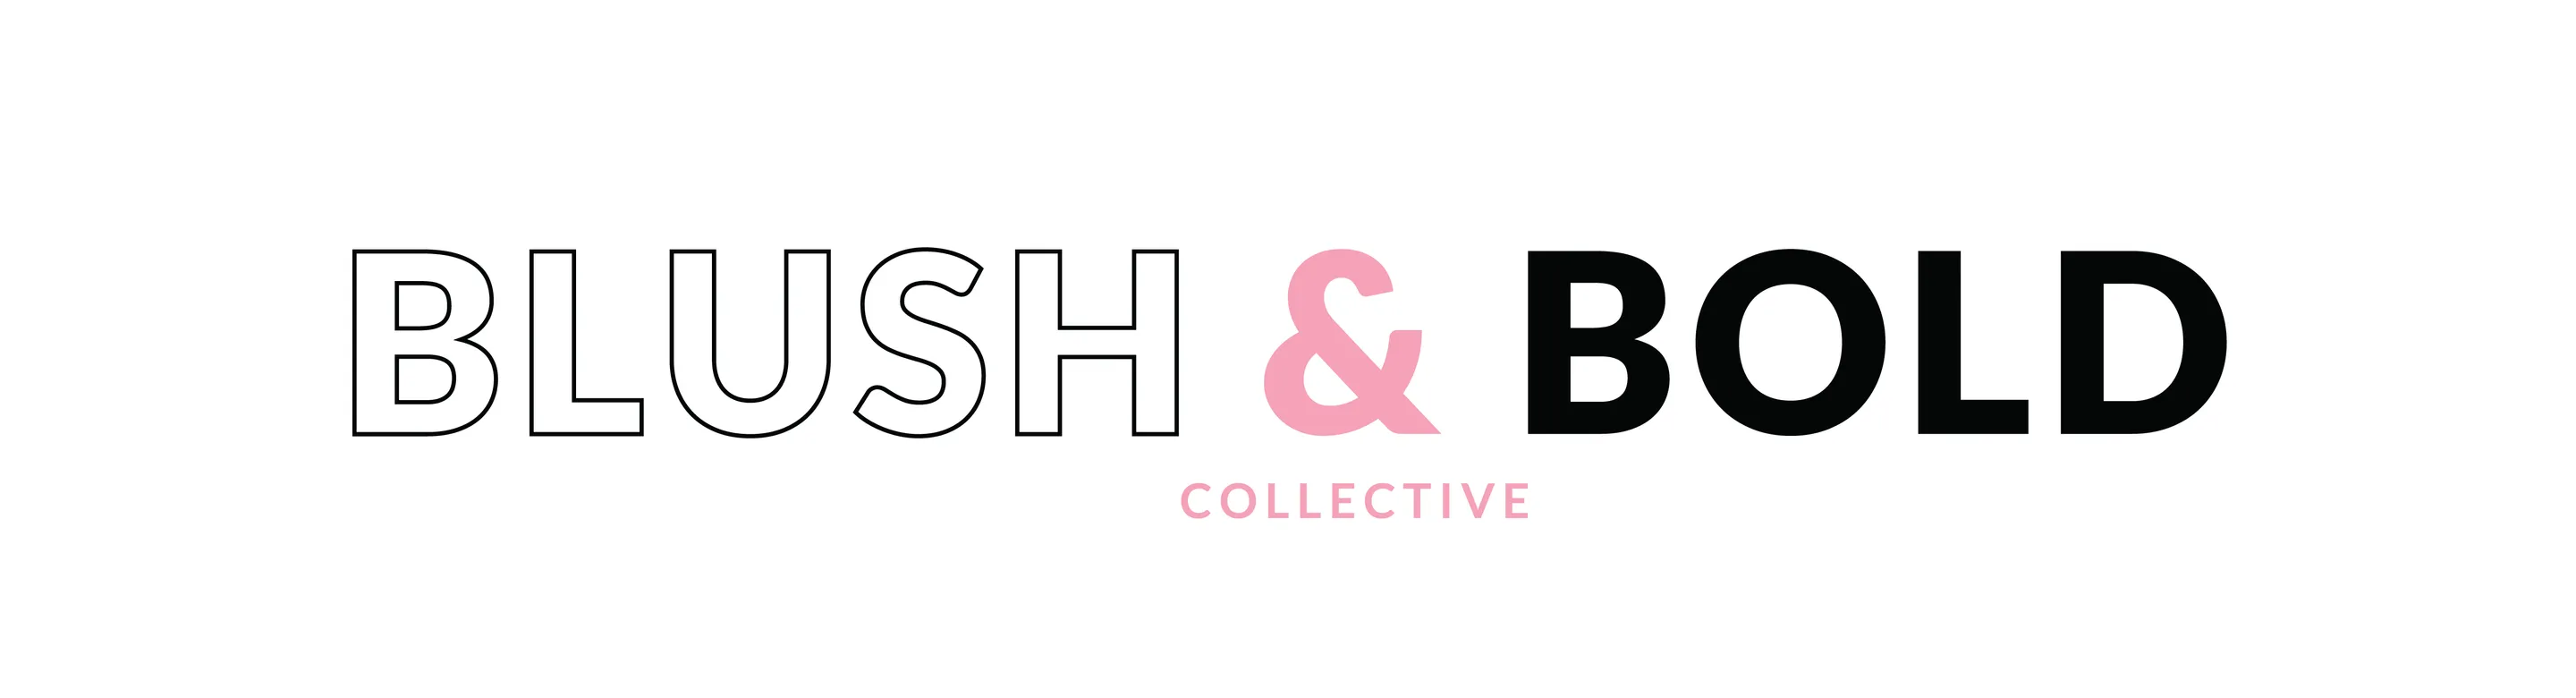 BLUSH AND BOLD COLLECTIVE